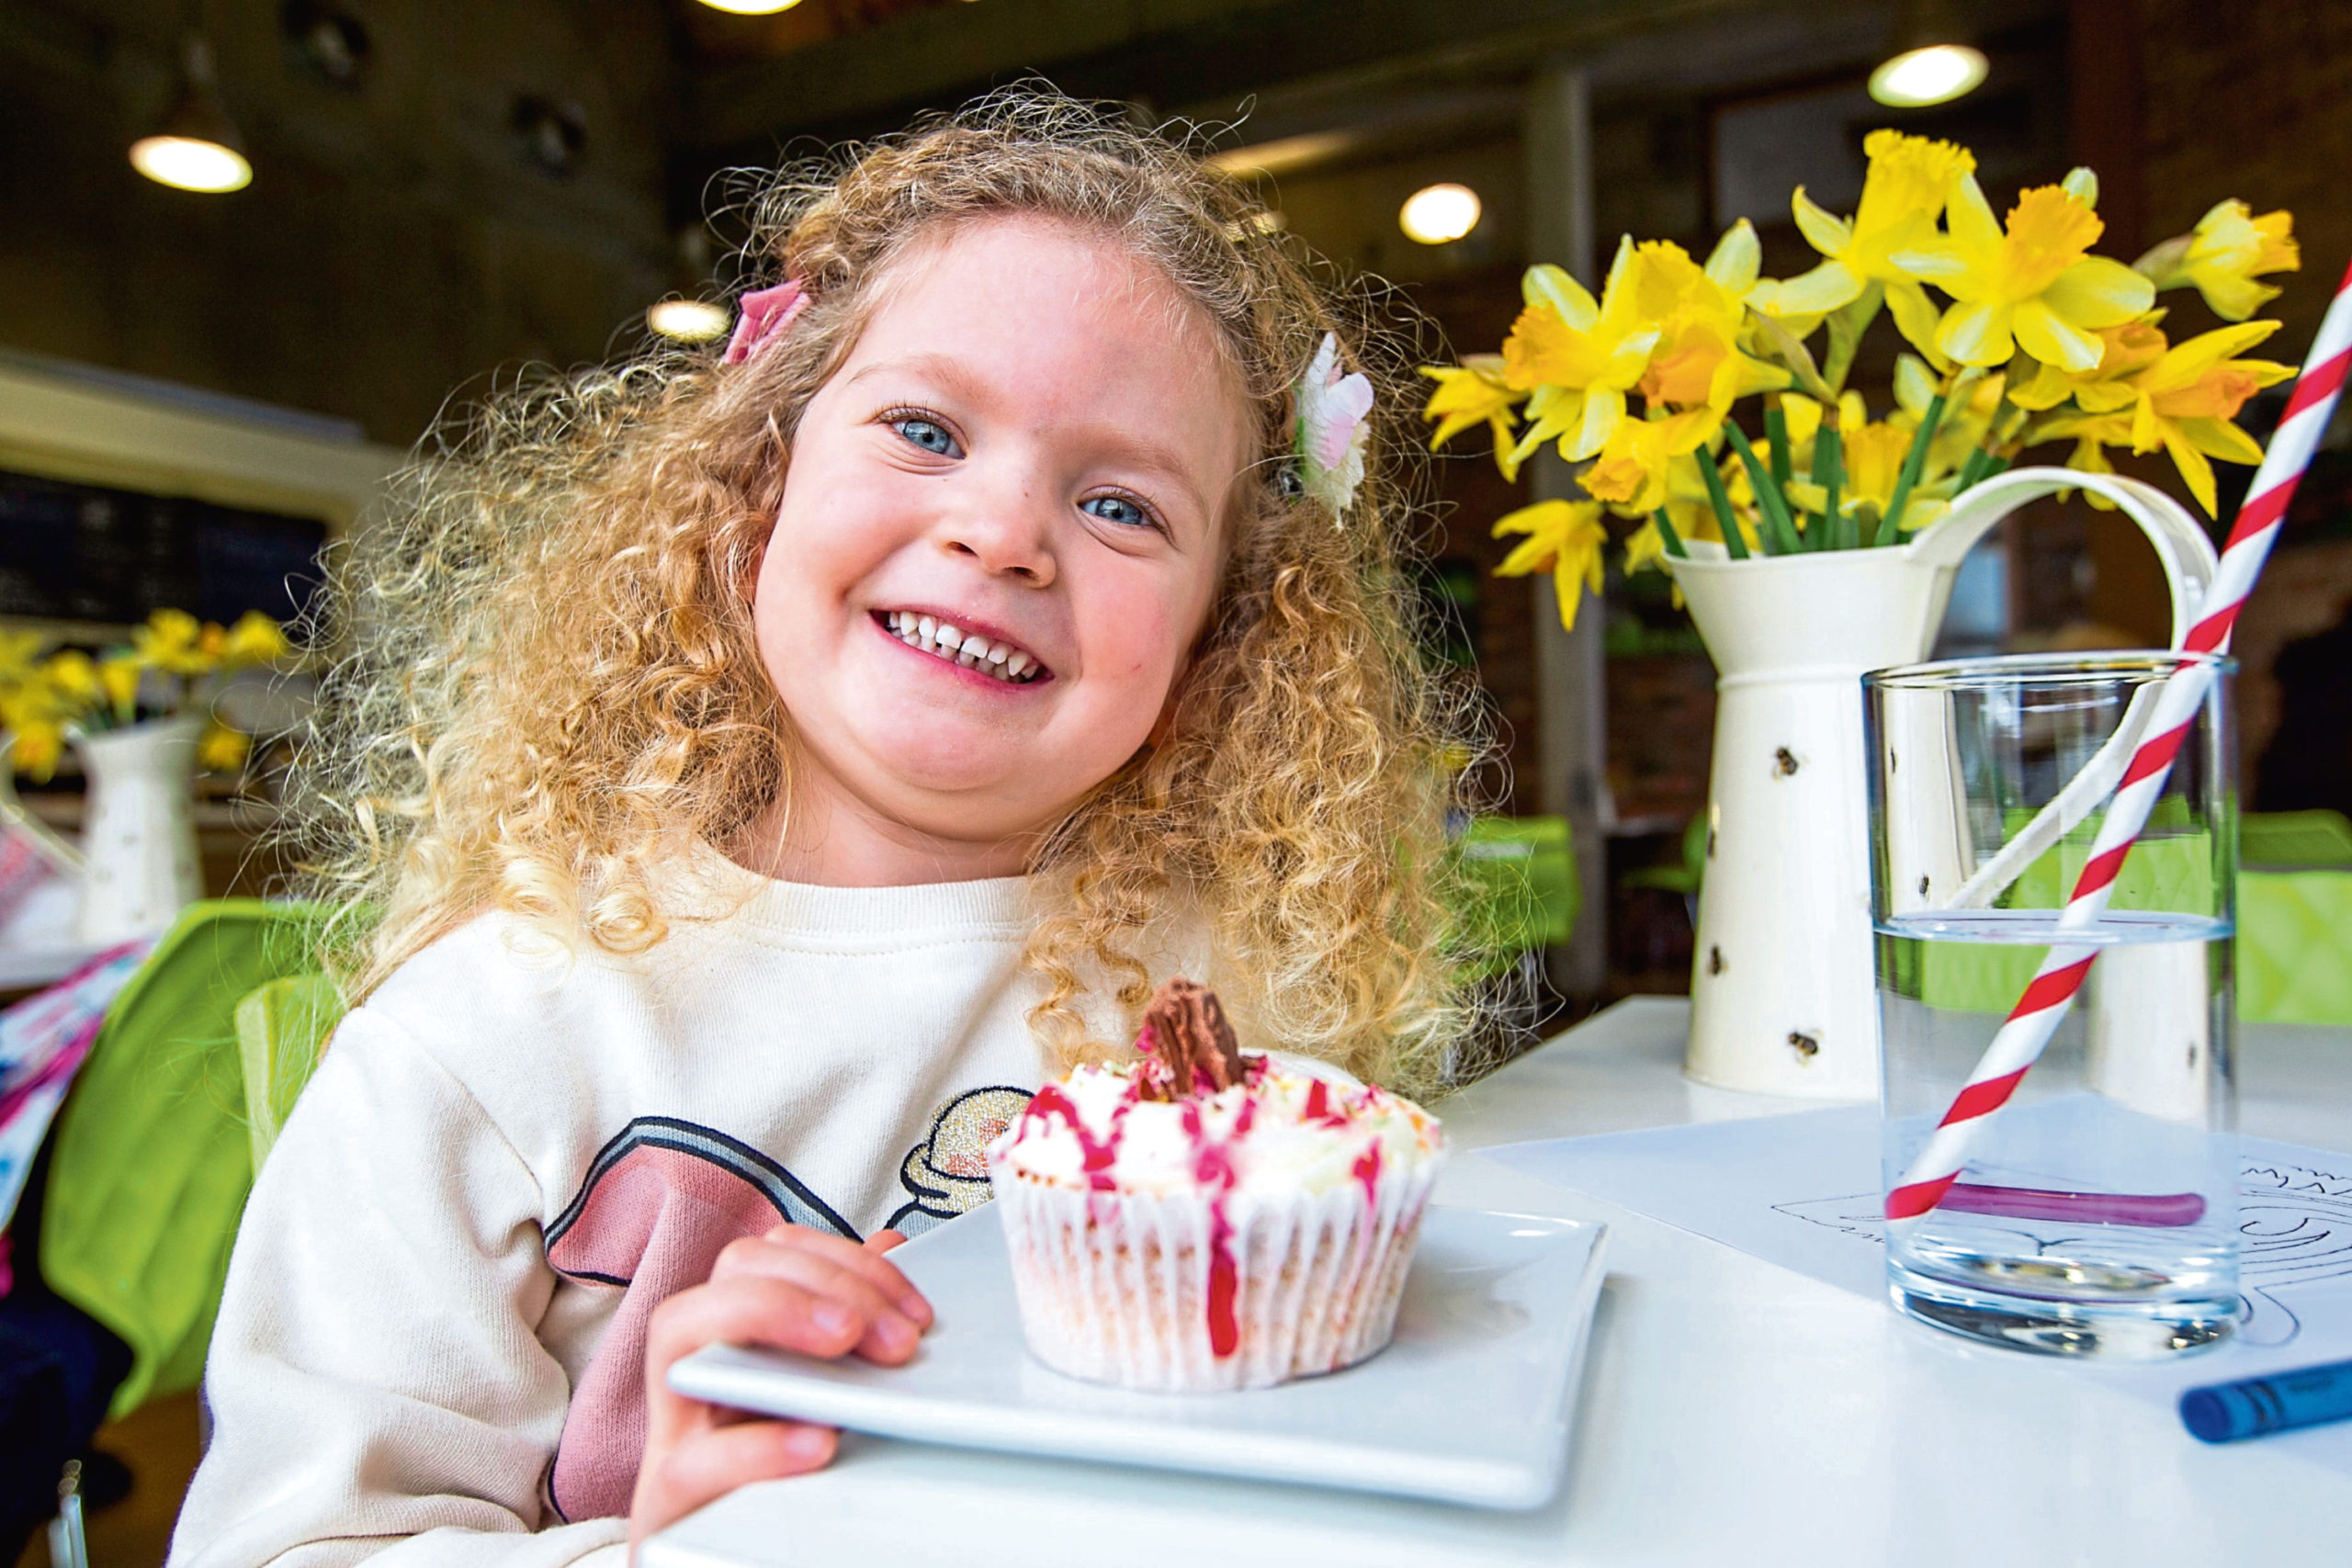 Wee Isabella has a big smile as she is about to enjoy a scrummy-looking cupcake at the Museum Of Rural life